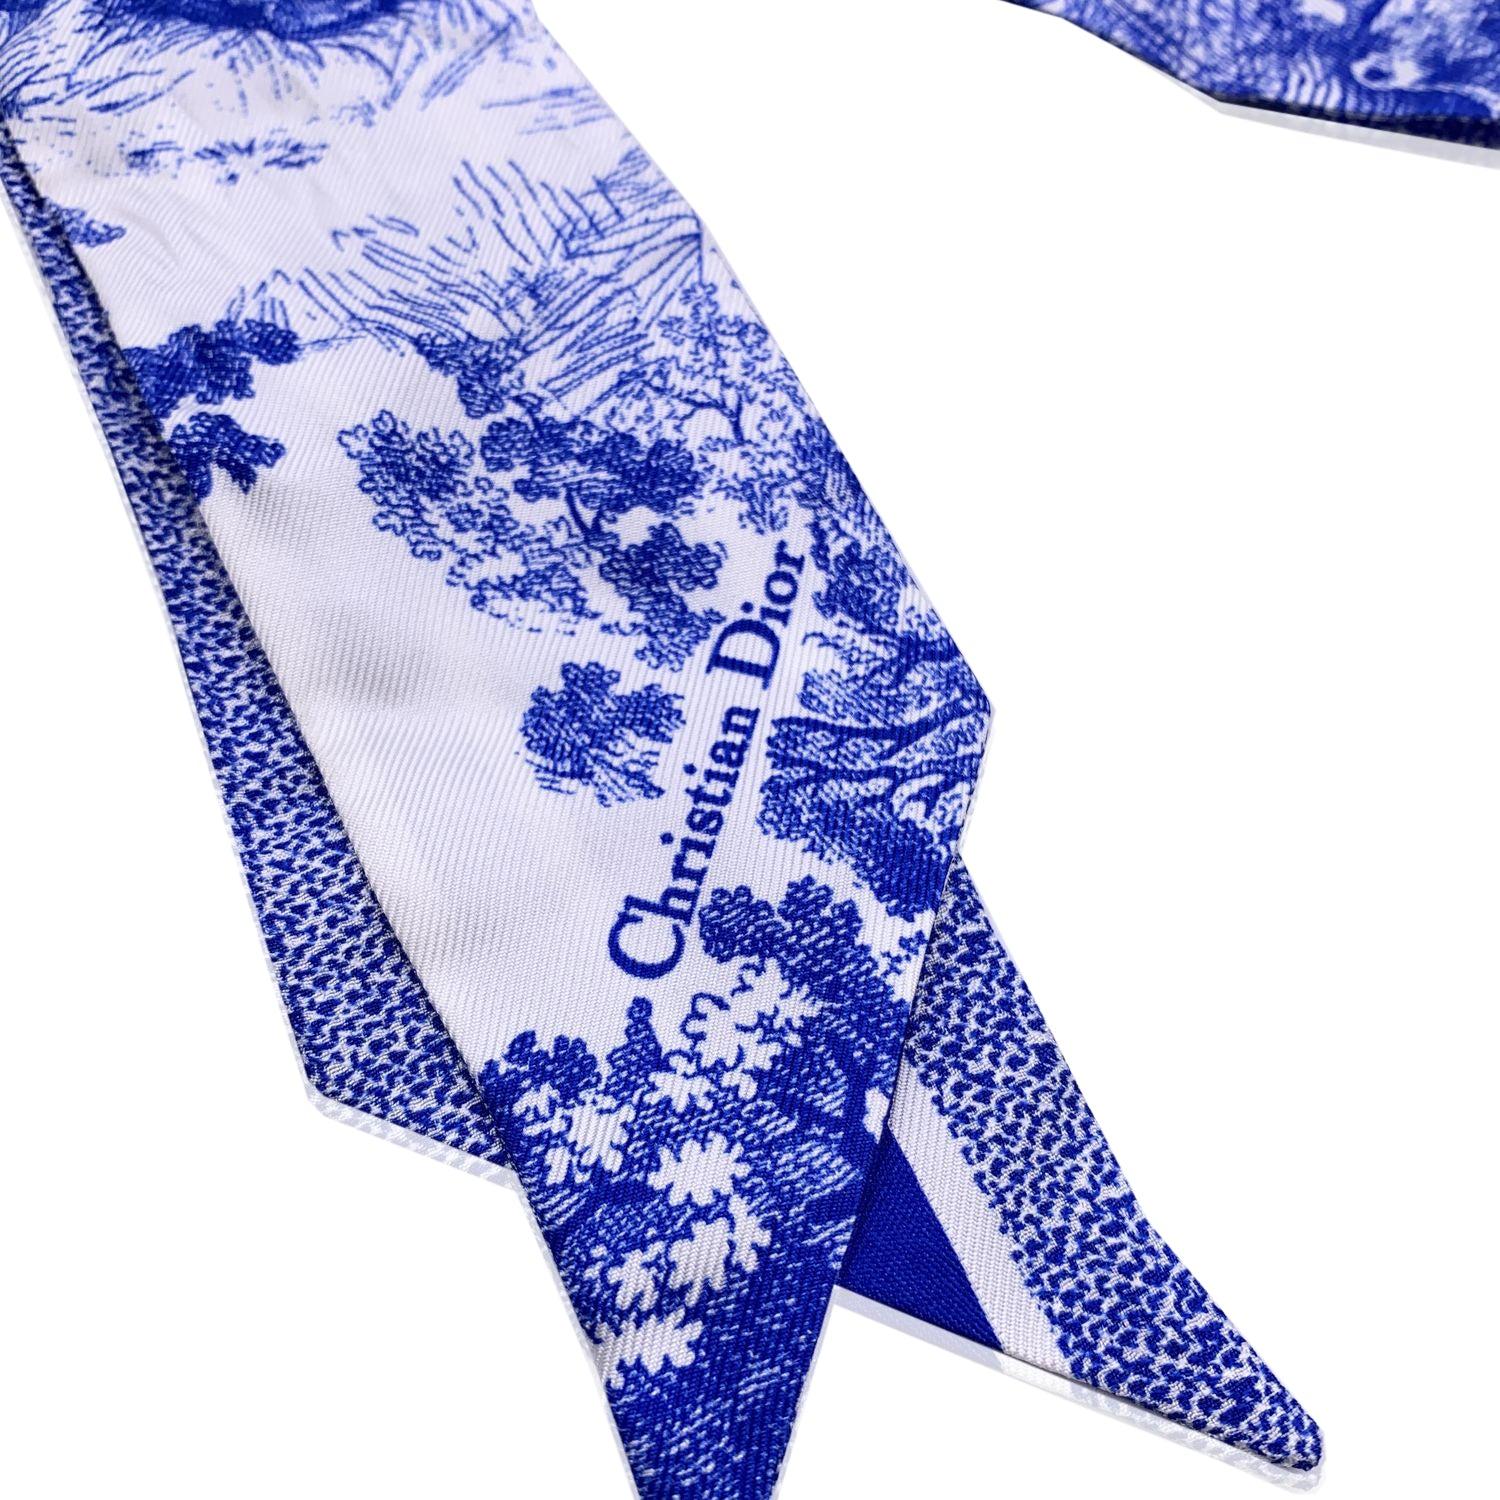 Christian Dior Blue and White Silk Twilly scarf. Toile De Jouy Sauvage print on one side and stripes with Christian Dior signature on the other. Composition: 100% Silk. Total length: 41 inches - 104.2 cm. Width: 2.25 inches - 5.7 cm. Dior tag and